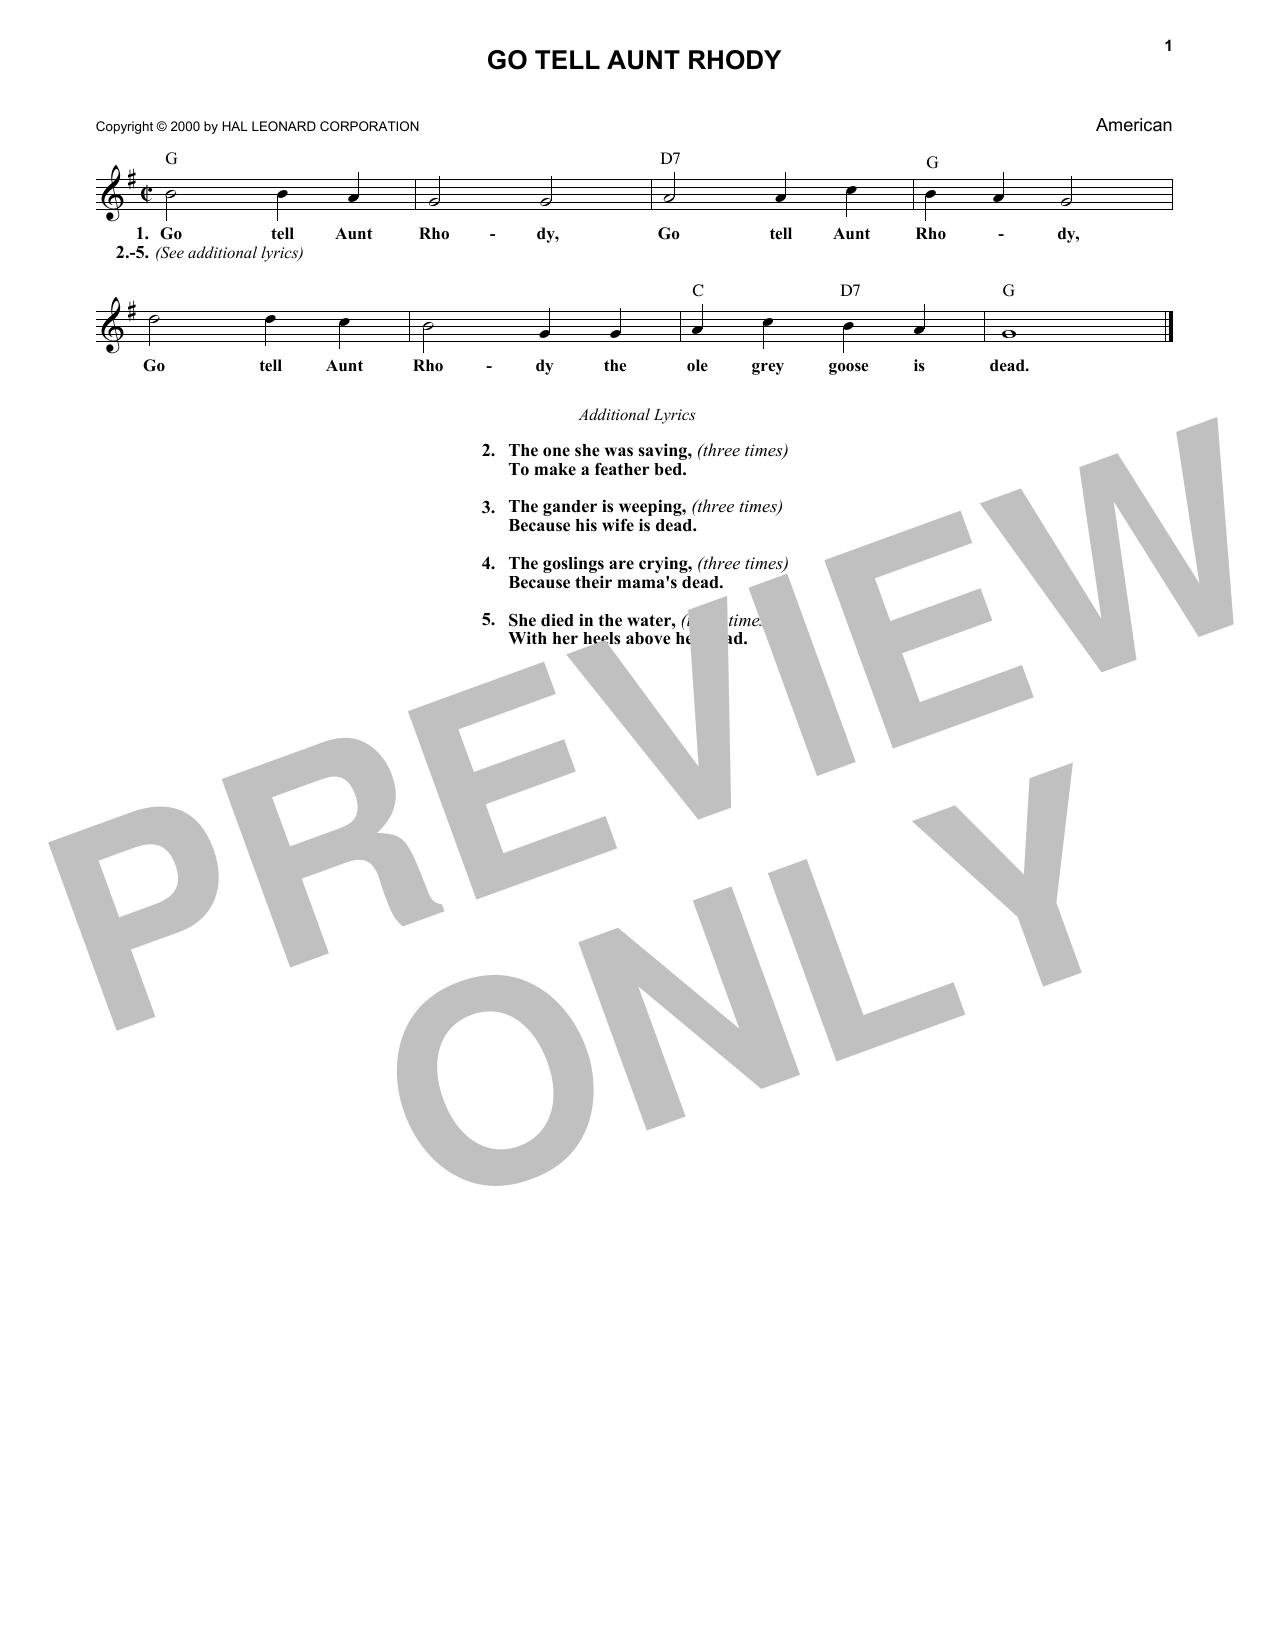 Download Traditional (Go Tell Aunt Rhody) The Ole Grey Goose Sheet Music